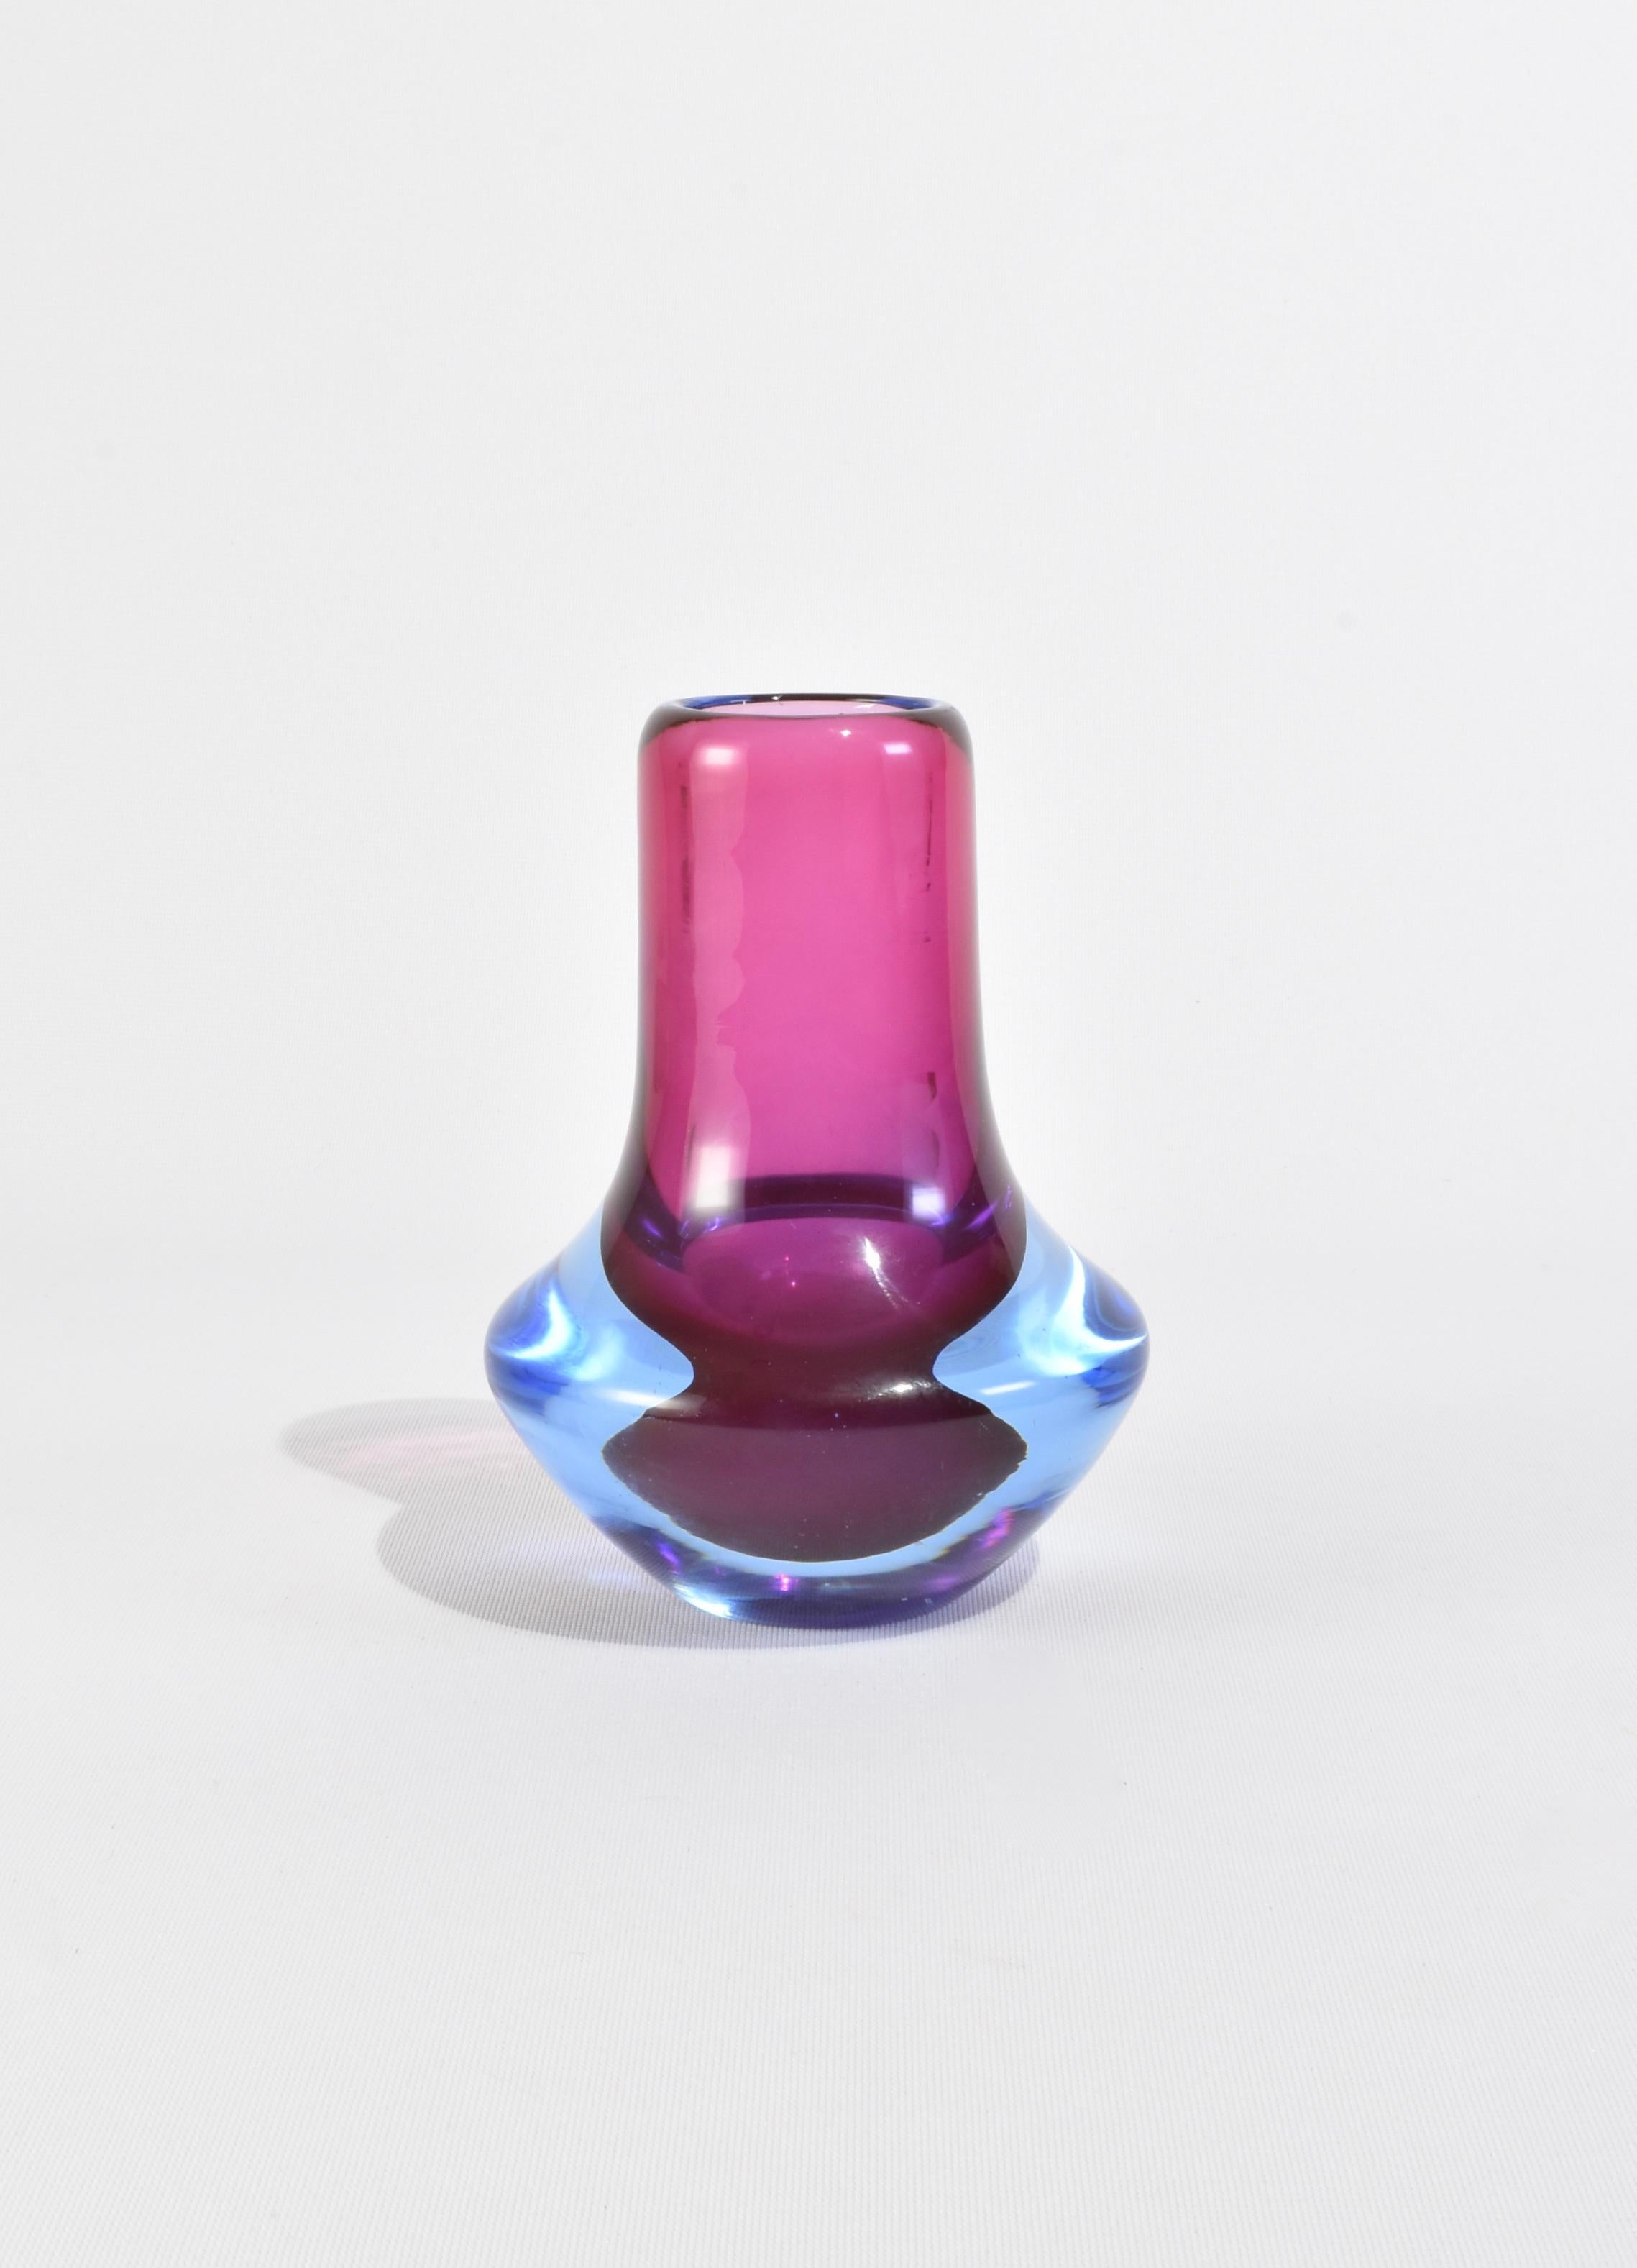 Stunning vintage blown glass sommerso vase in blue and pink. Made in Murano, Italy.